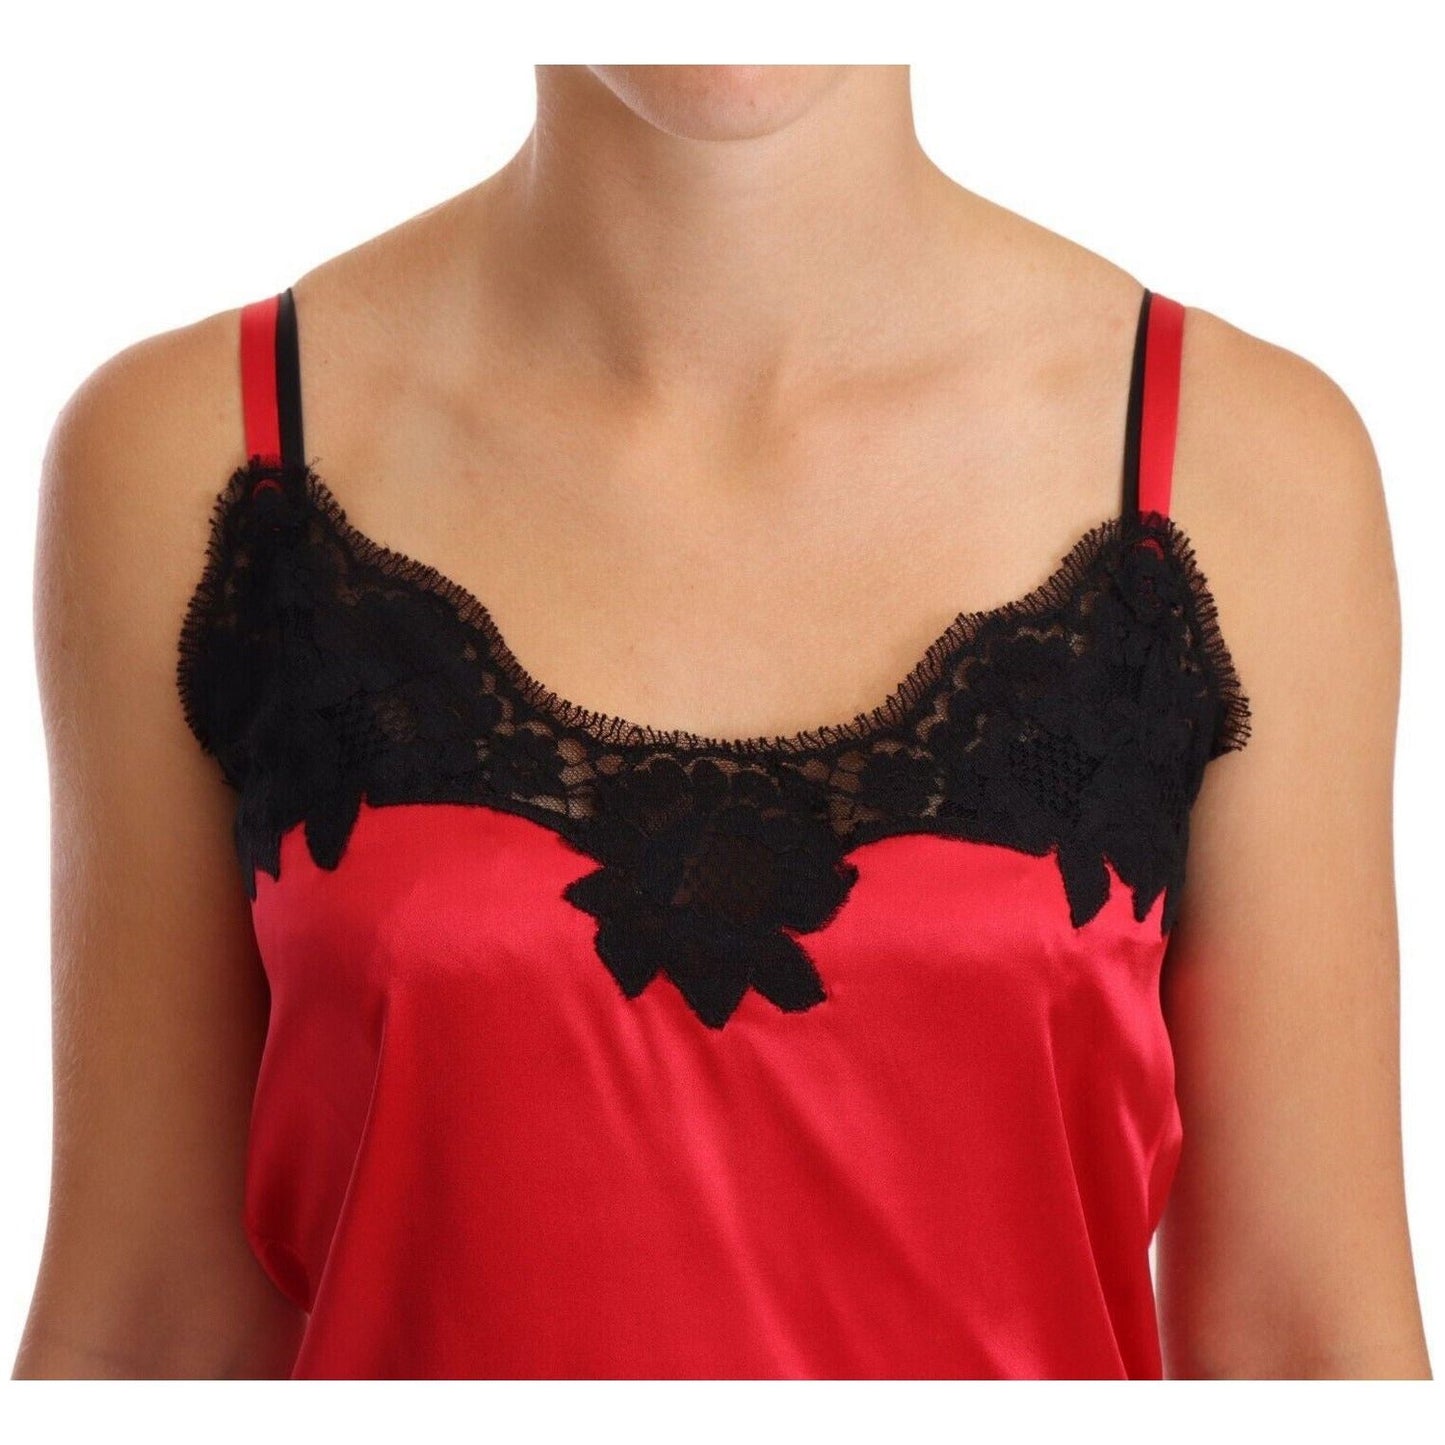 Dolce & Gabbana Silk Blend Lace-Trim Camisole in Red & Black WOMAN UNDERWEAR red-floral-lace-silk-satin-camisole-lingerie-top